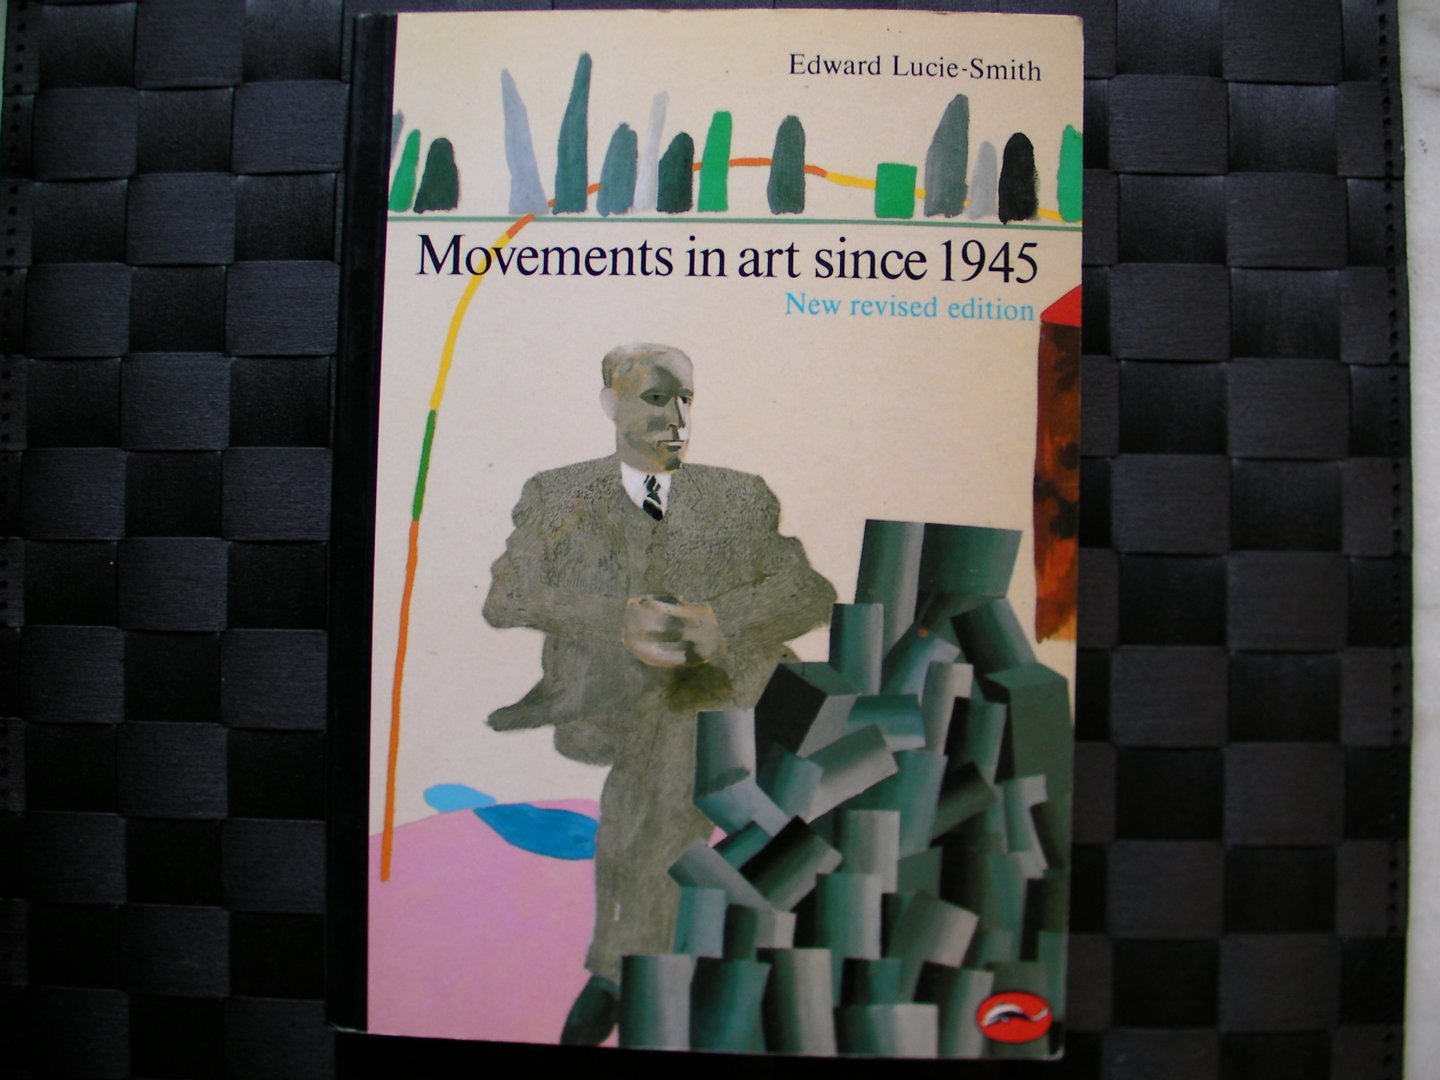 Edward Lucie Smith - Movements in art since 1945